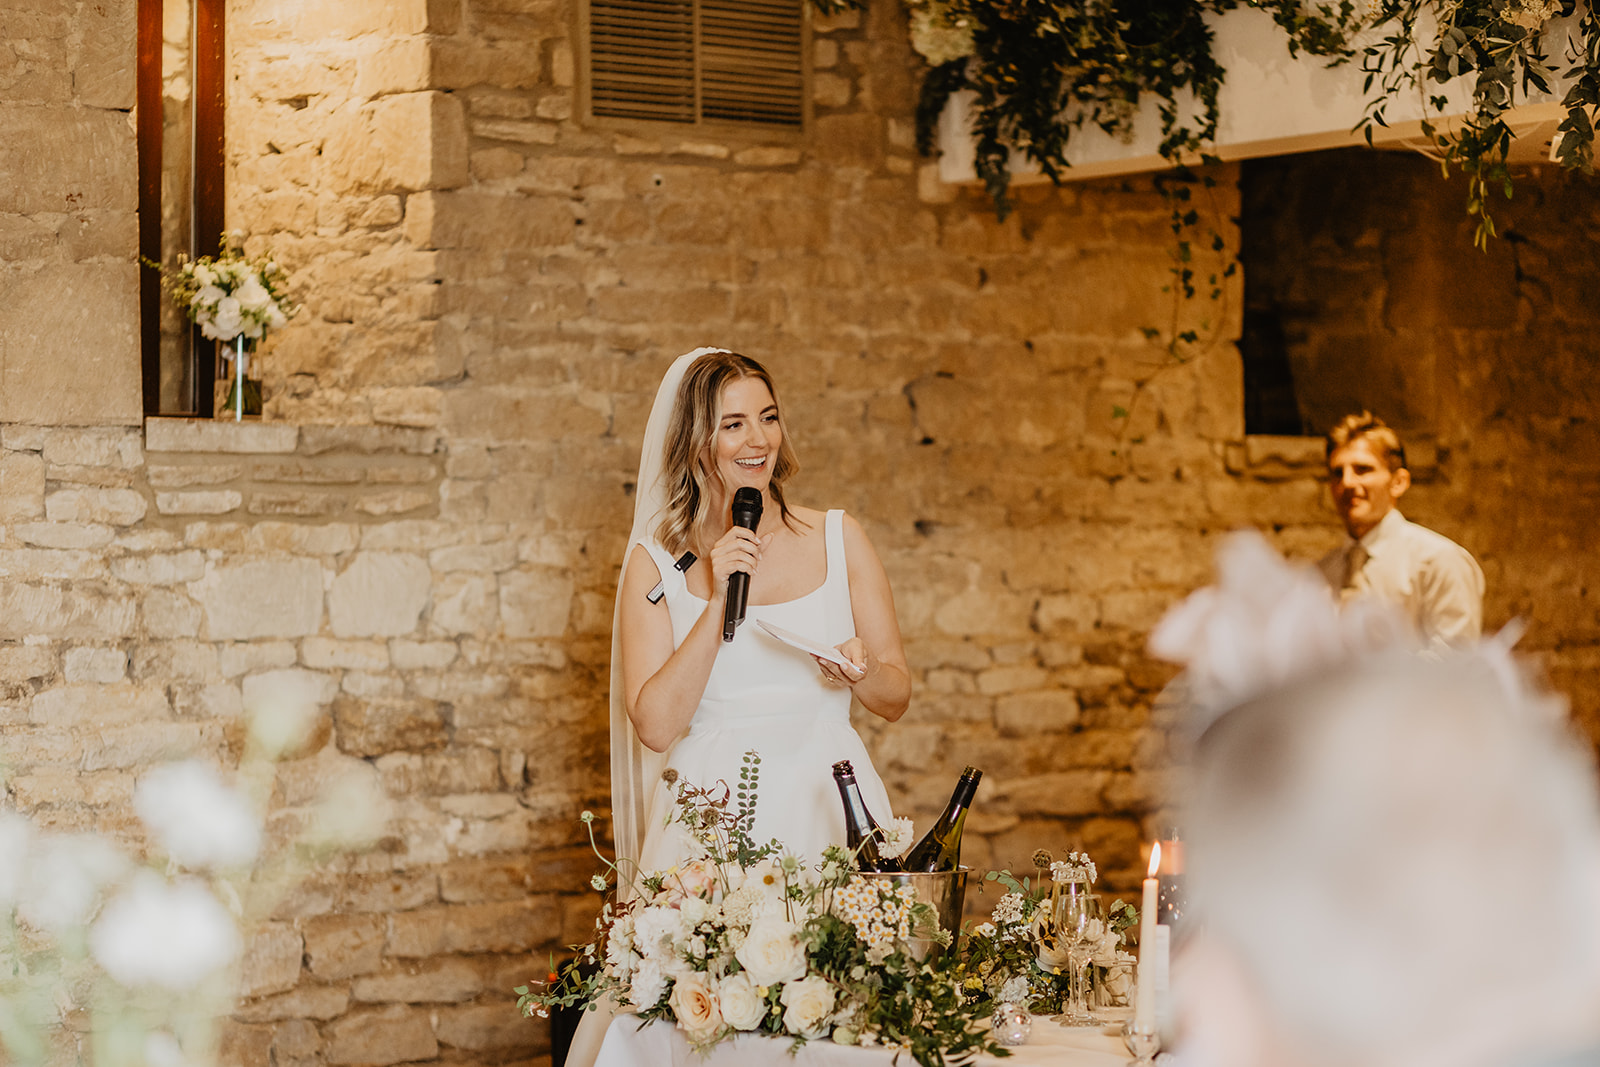 Bride at a Great Tythe Barn Wedding, Cotswolds. By Olive Joy Photography.